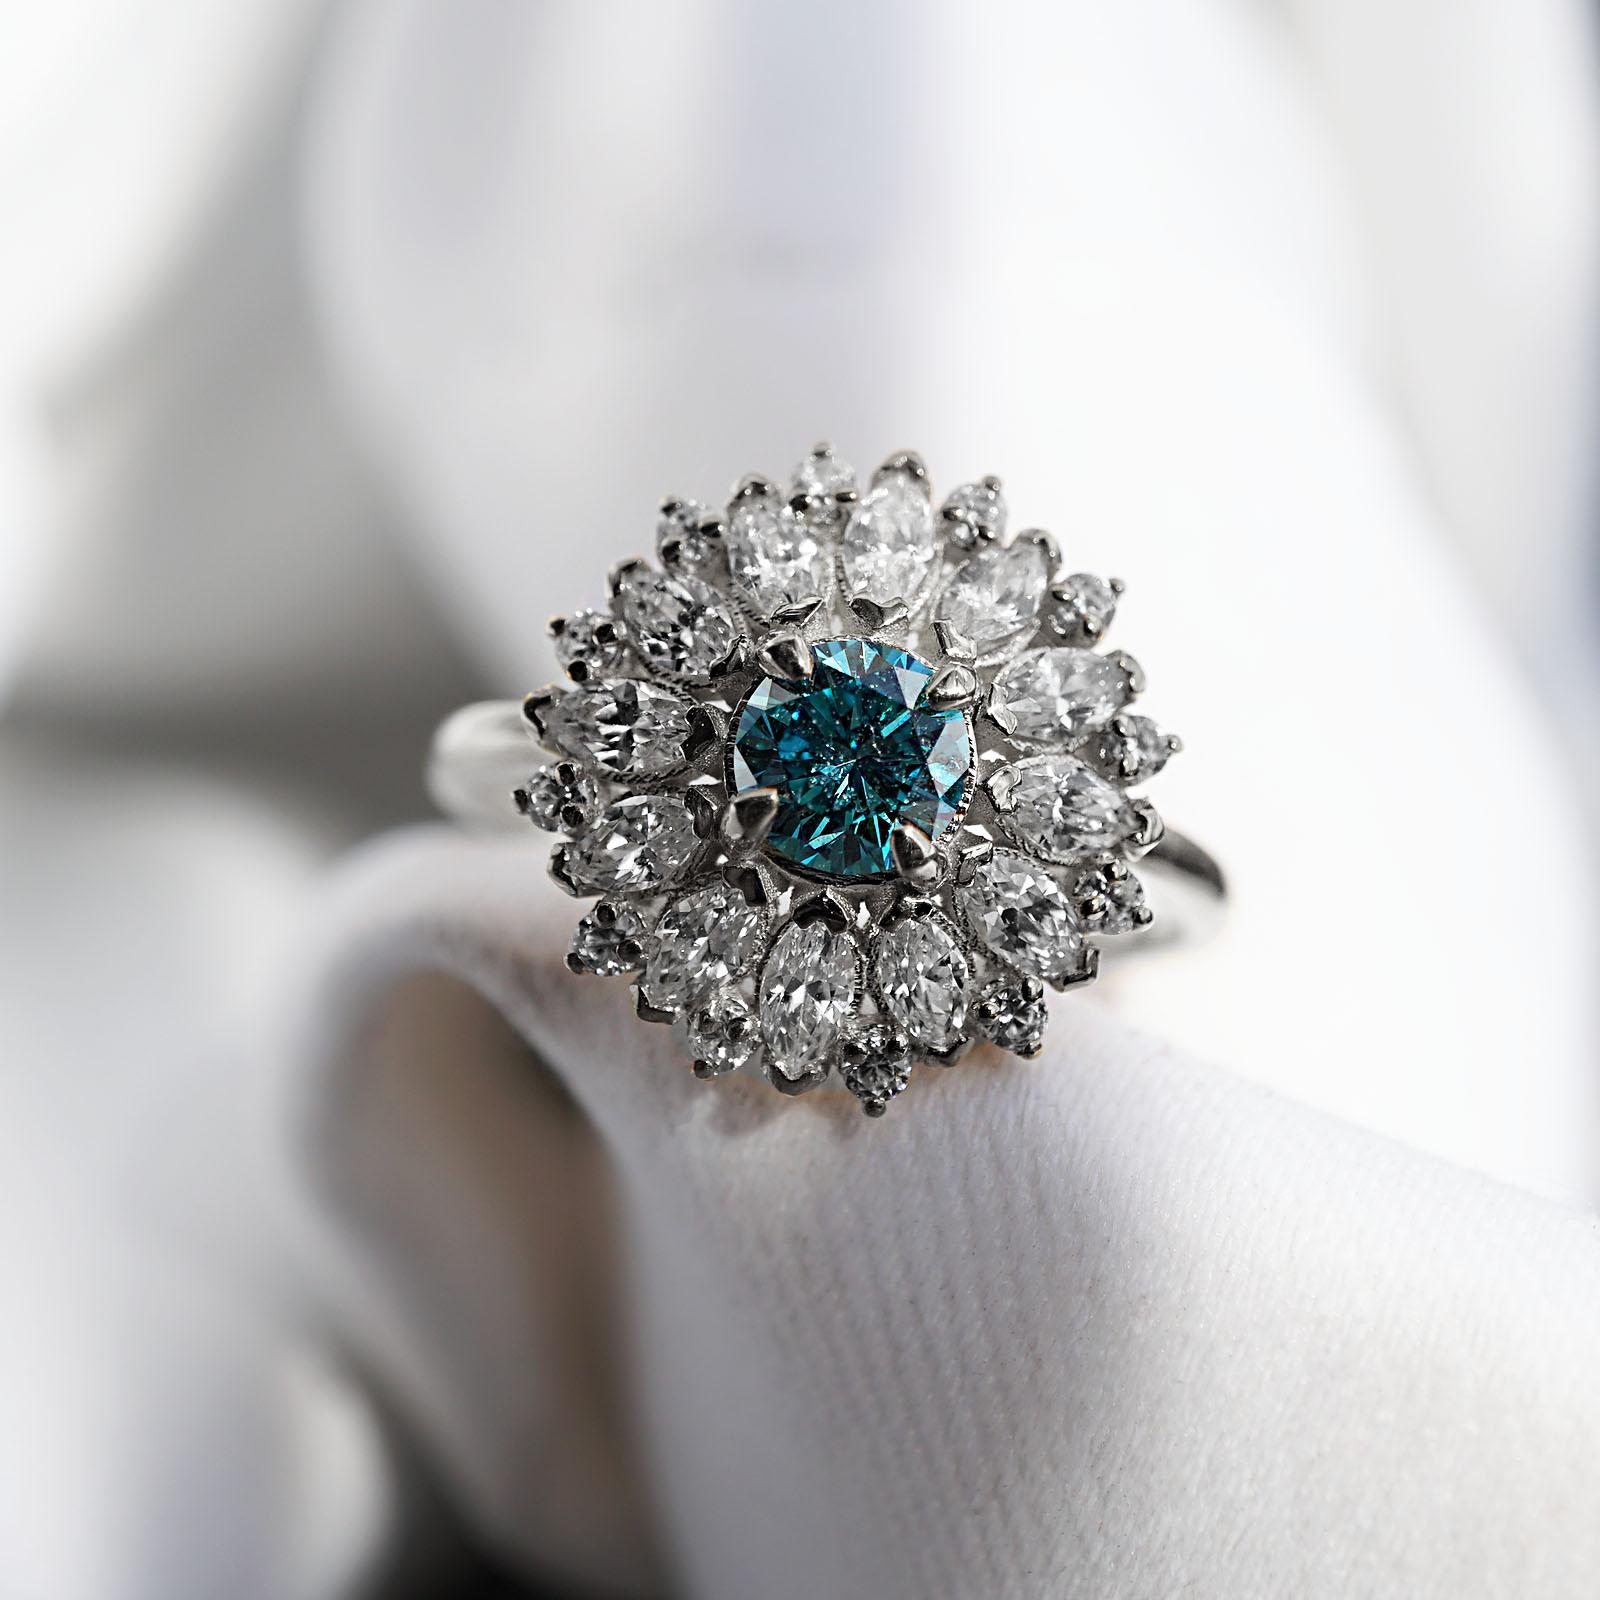 ** Tippy Taste Heirloom Collection is made to order. Please allow 3-4 week turnaround time. Make a note of your ring size and metal color during checkout.

This blue diamond ring features a rare teal blue diamond. Its vibrant color makes for a